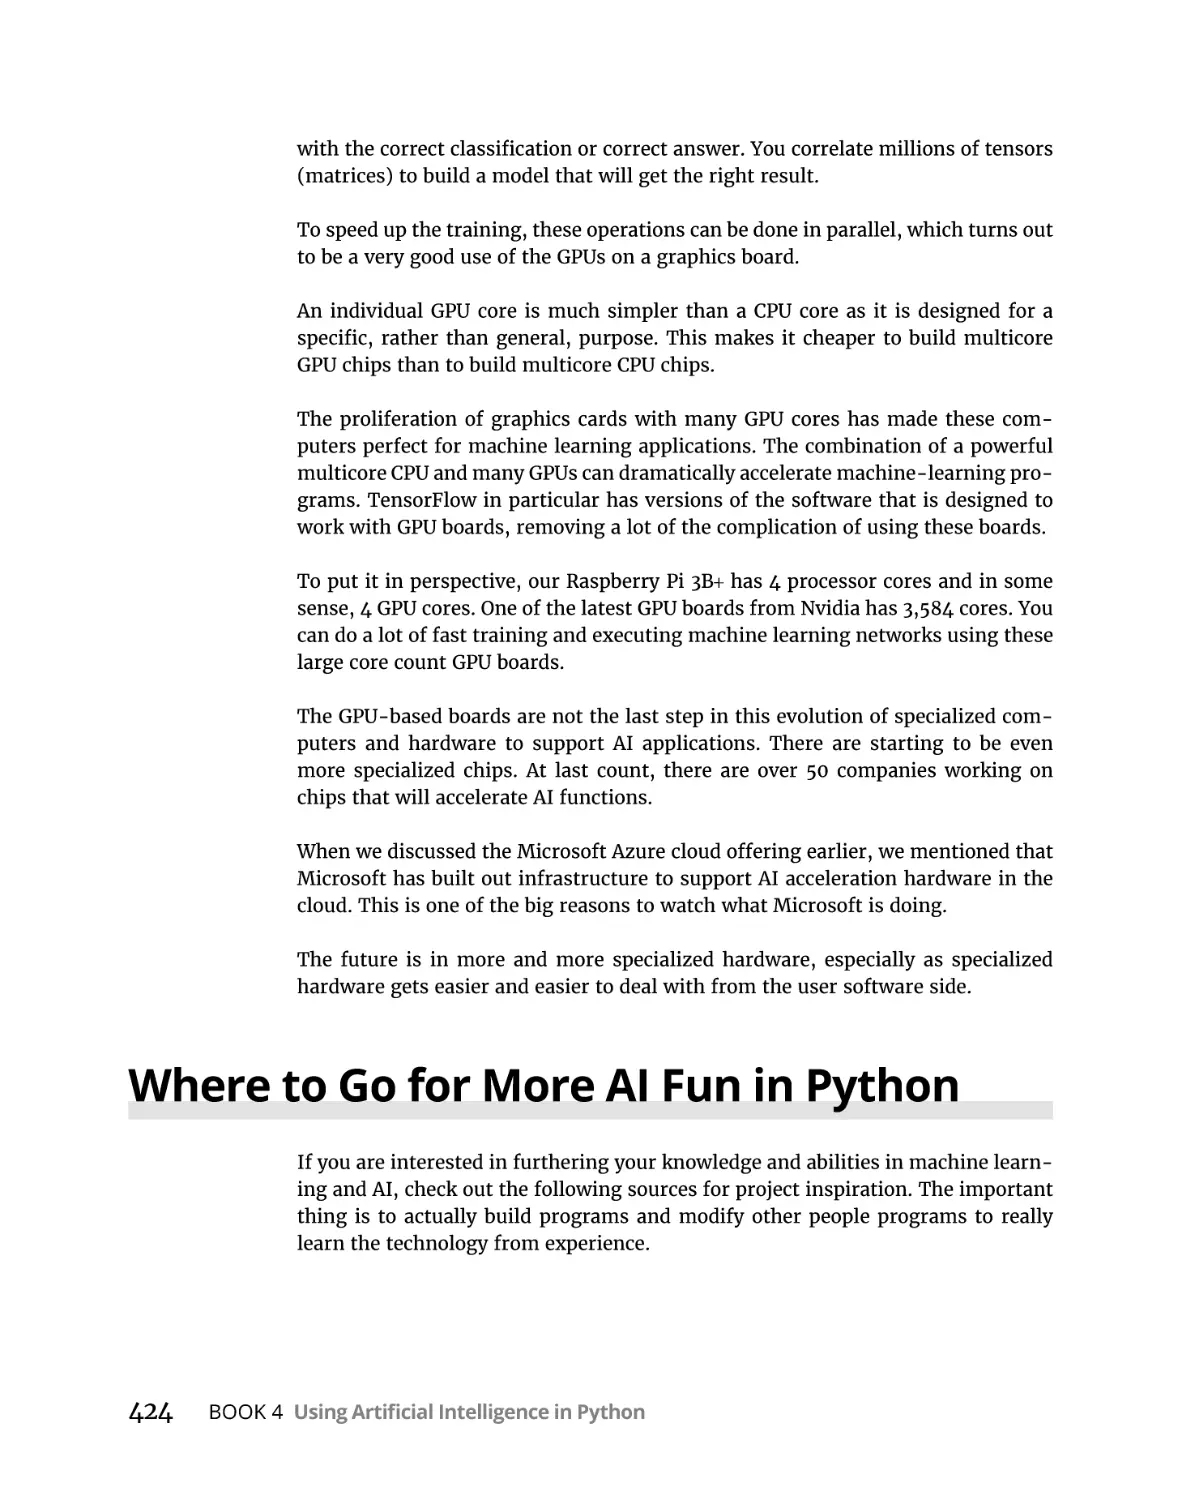 Where to Go for More AI Fun in Python